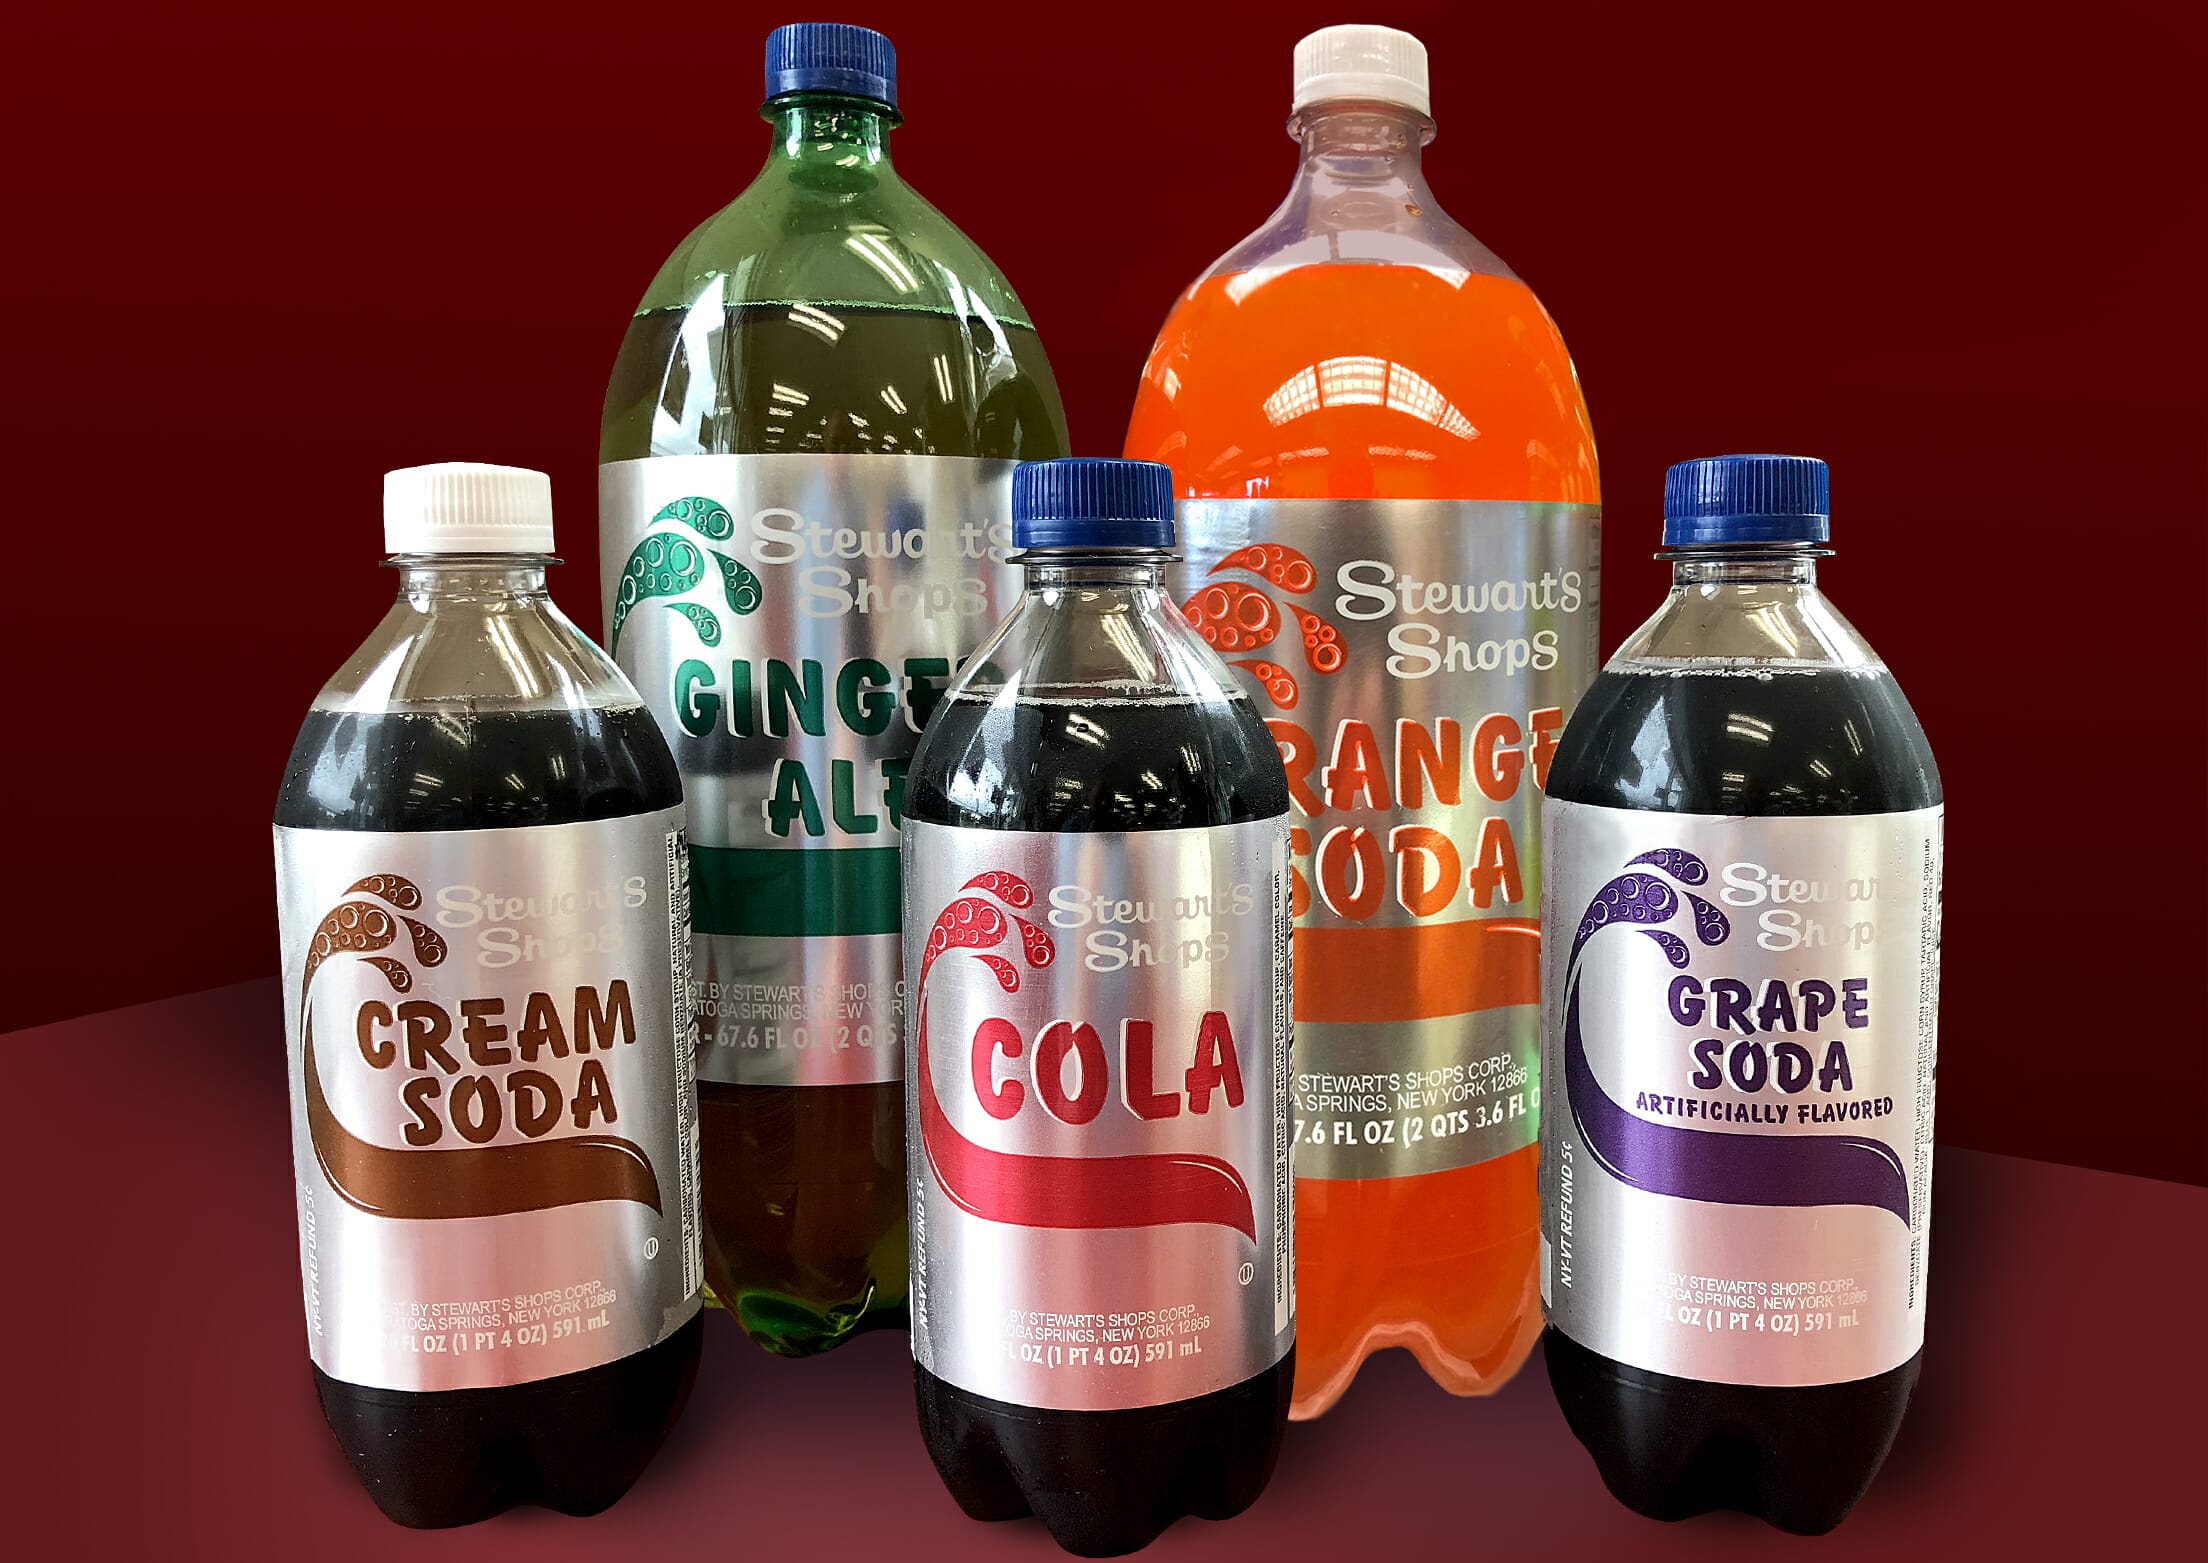 Lake George soda and candy shop offers flavor for all